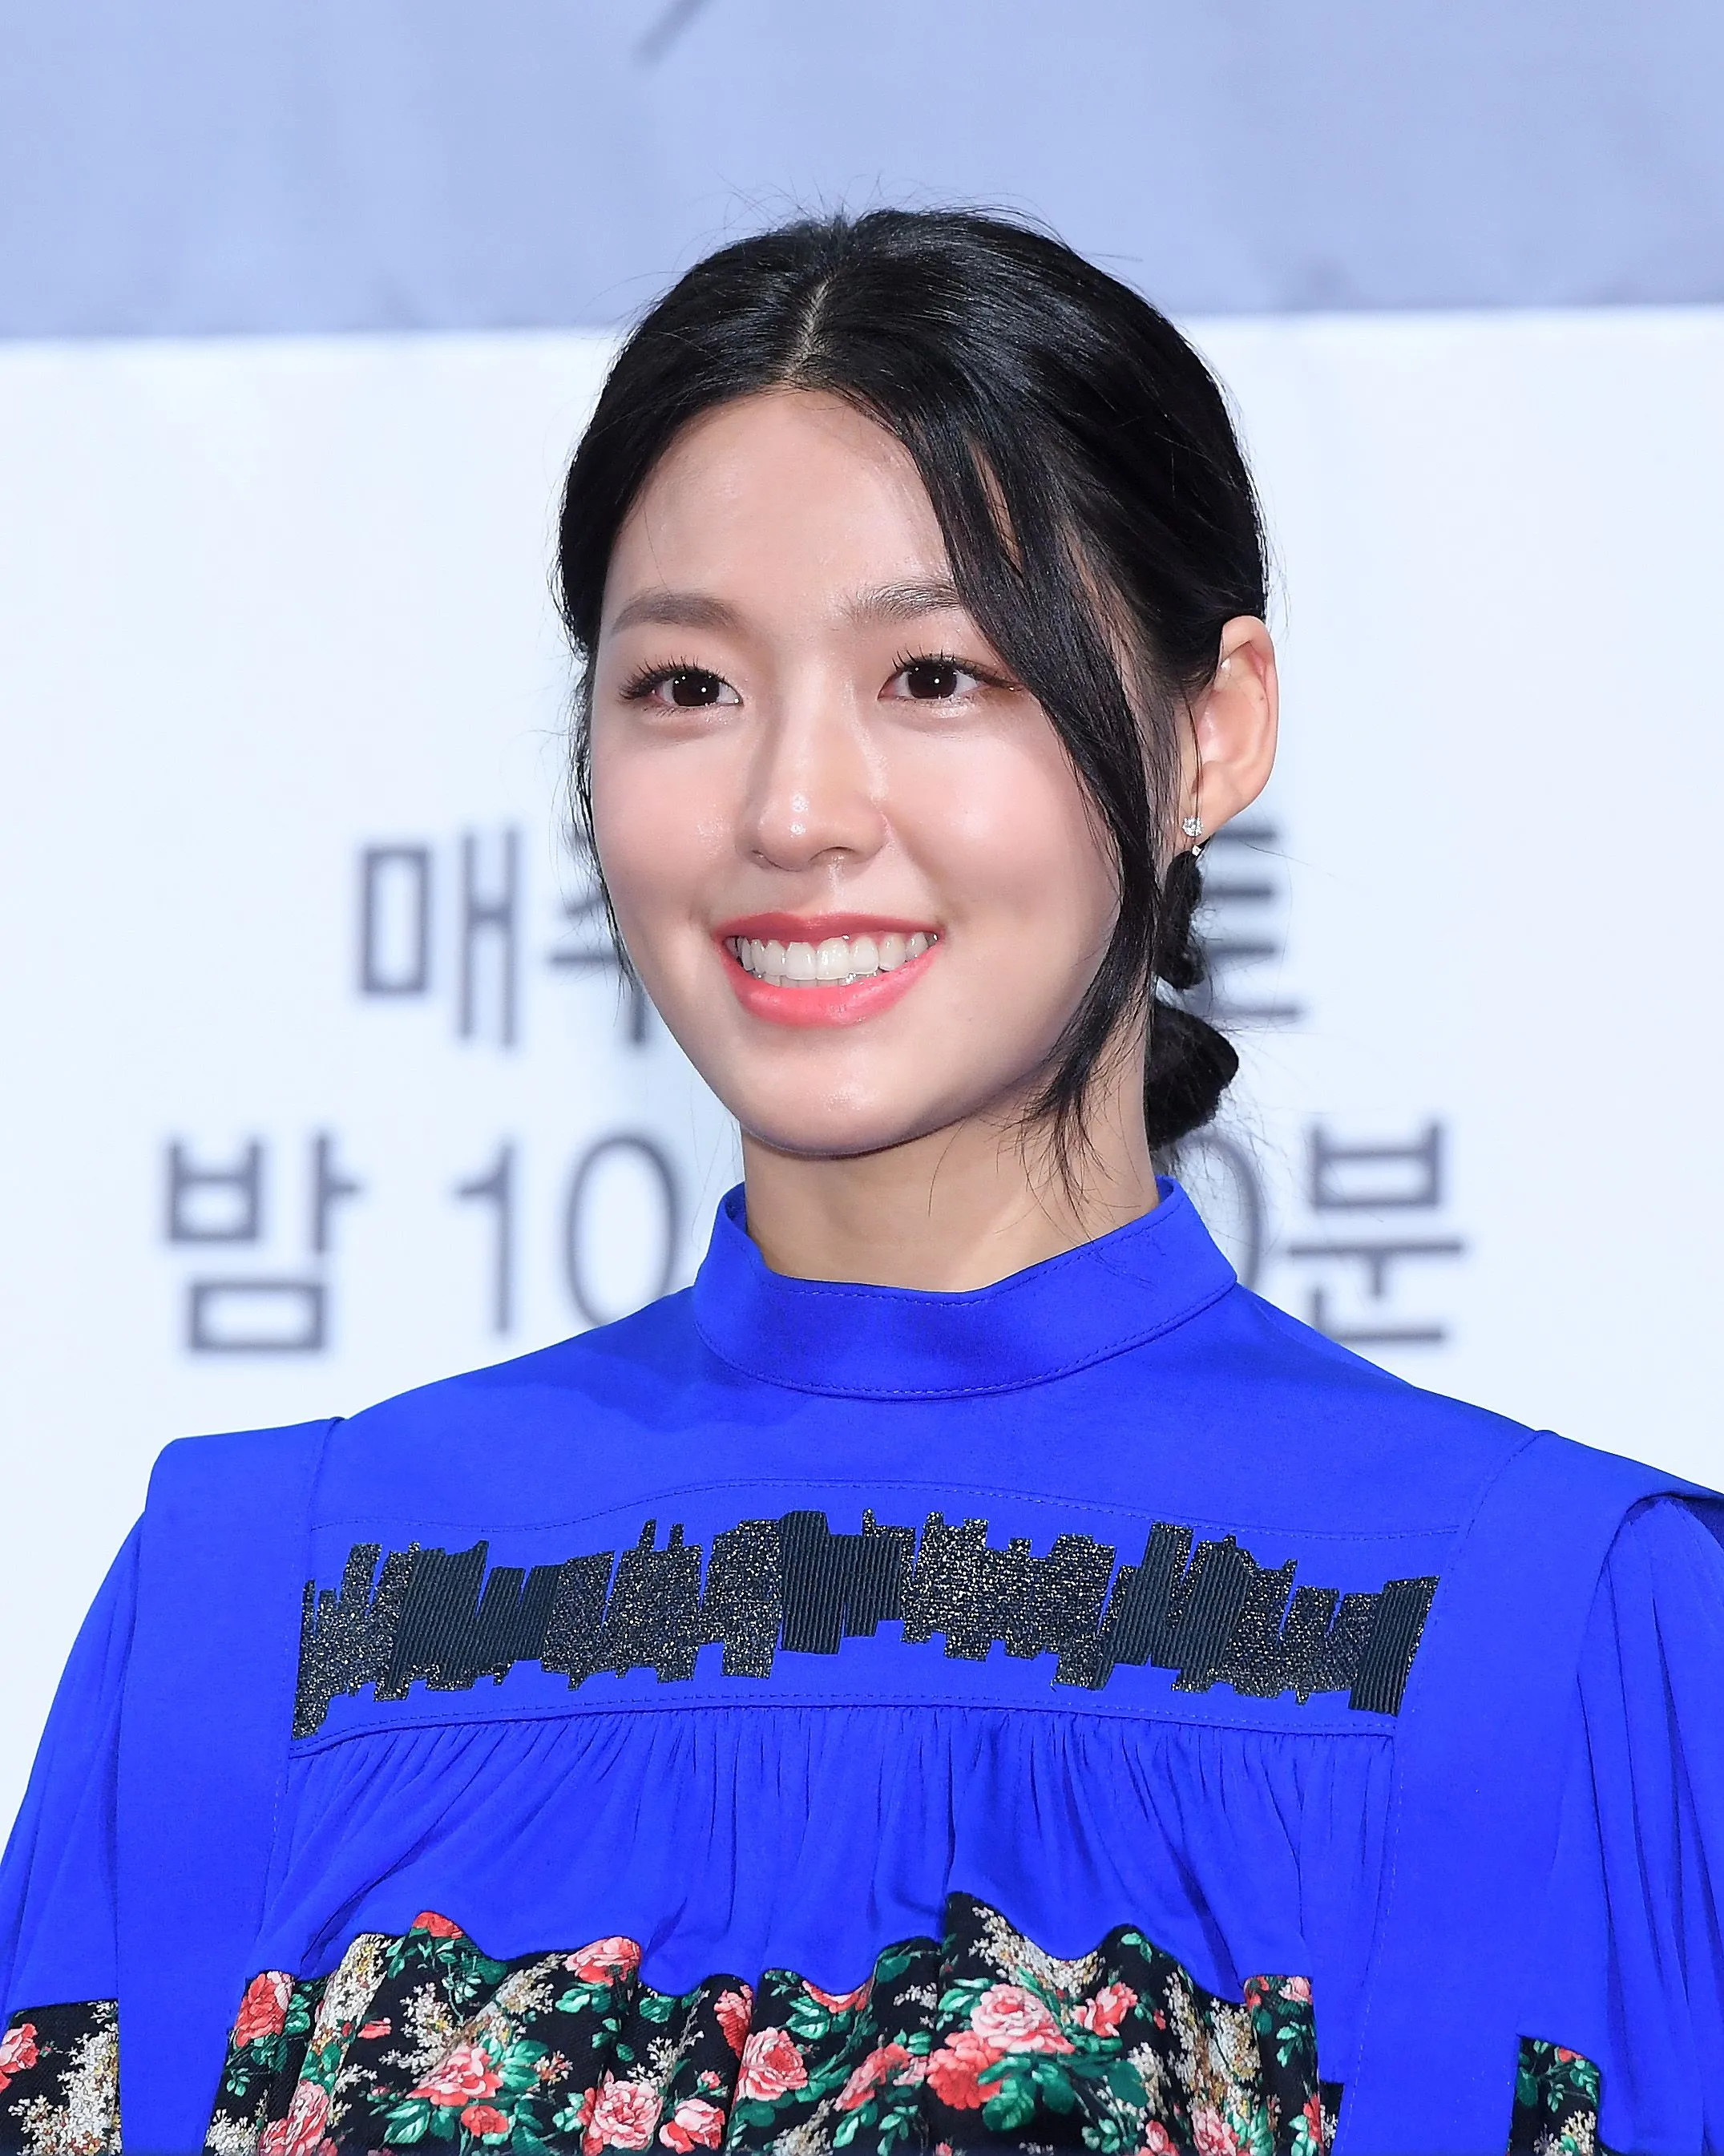 191002 Aoa S Seolhyun At Jtbc My Country Press Conference Kpopping